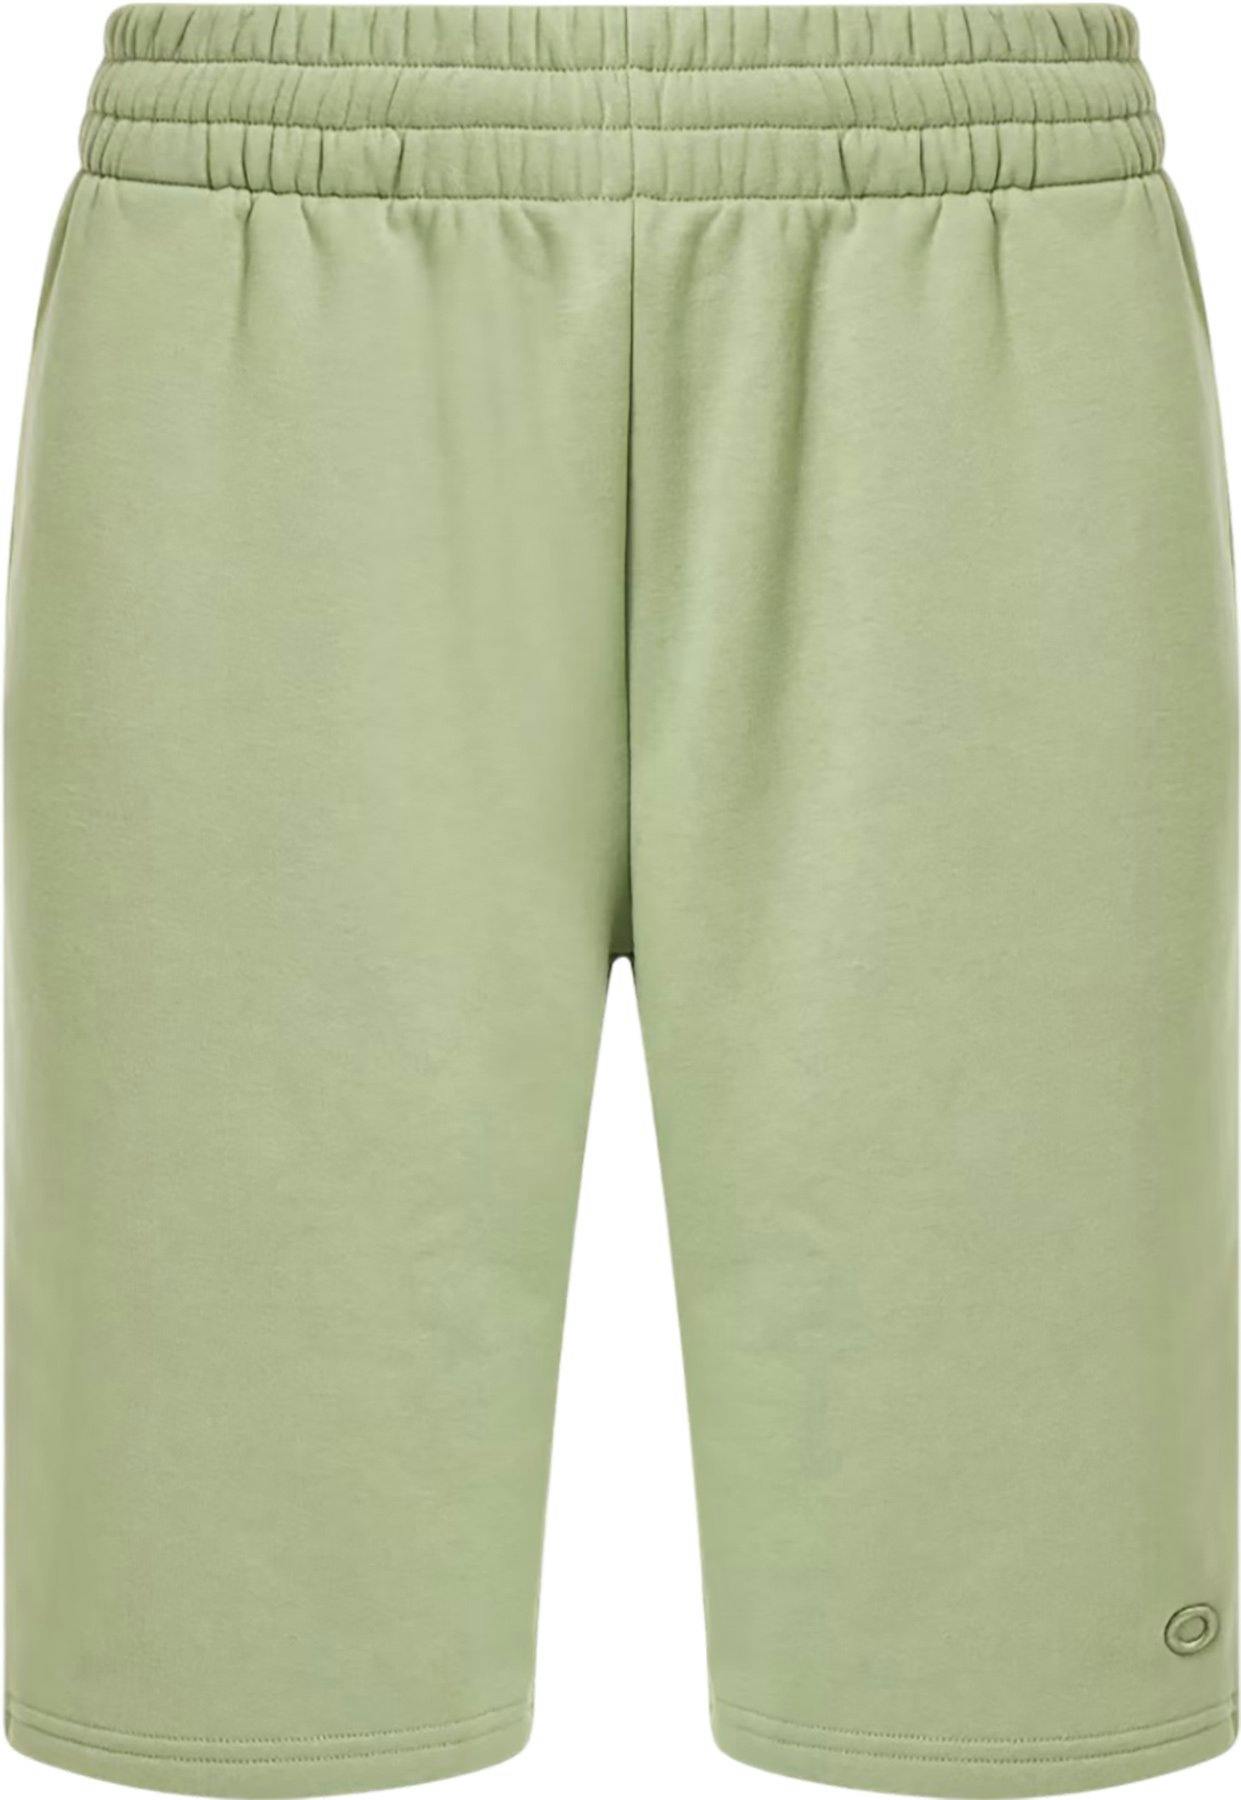 Product image for Relax 2.0 Shorts - Men's